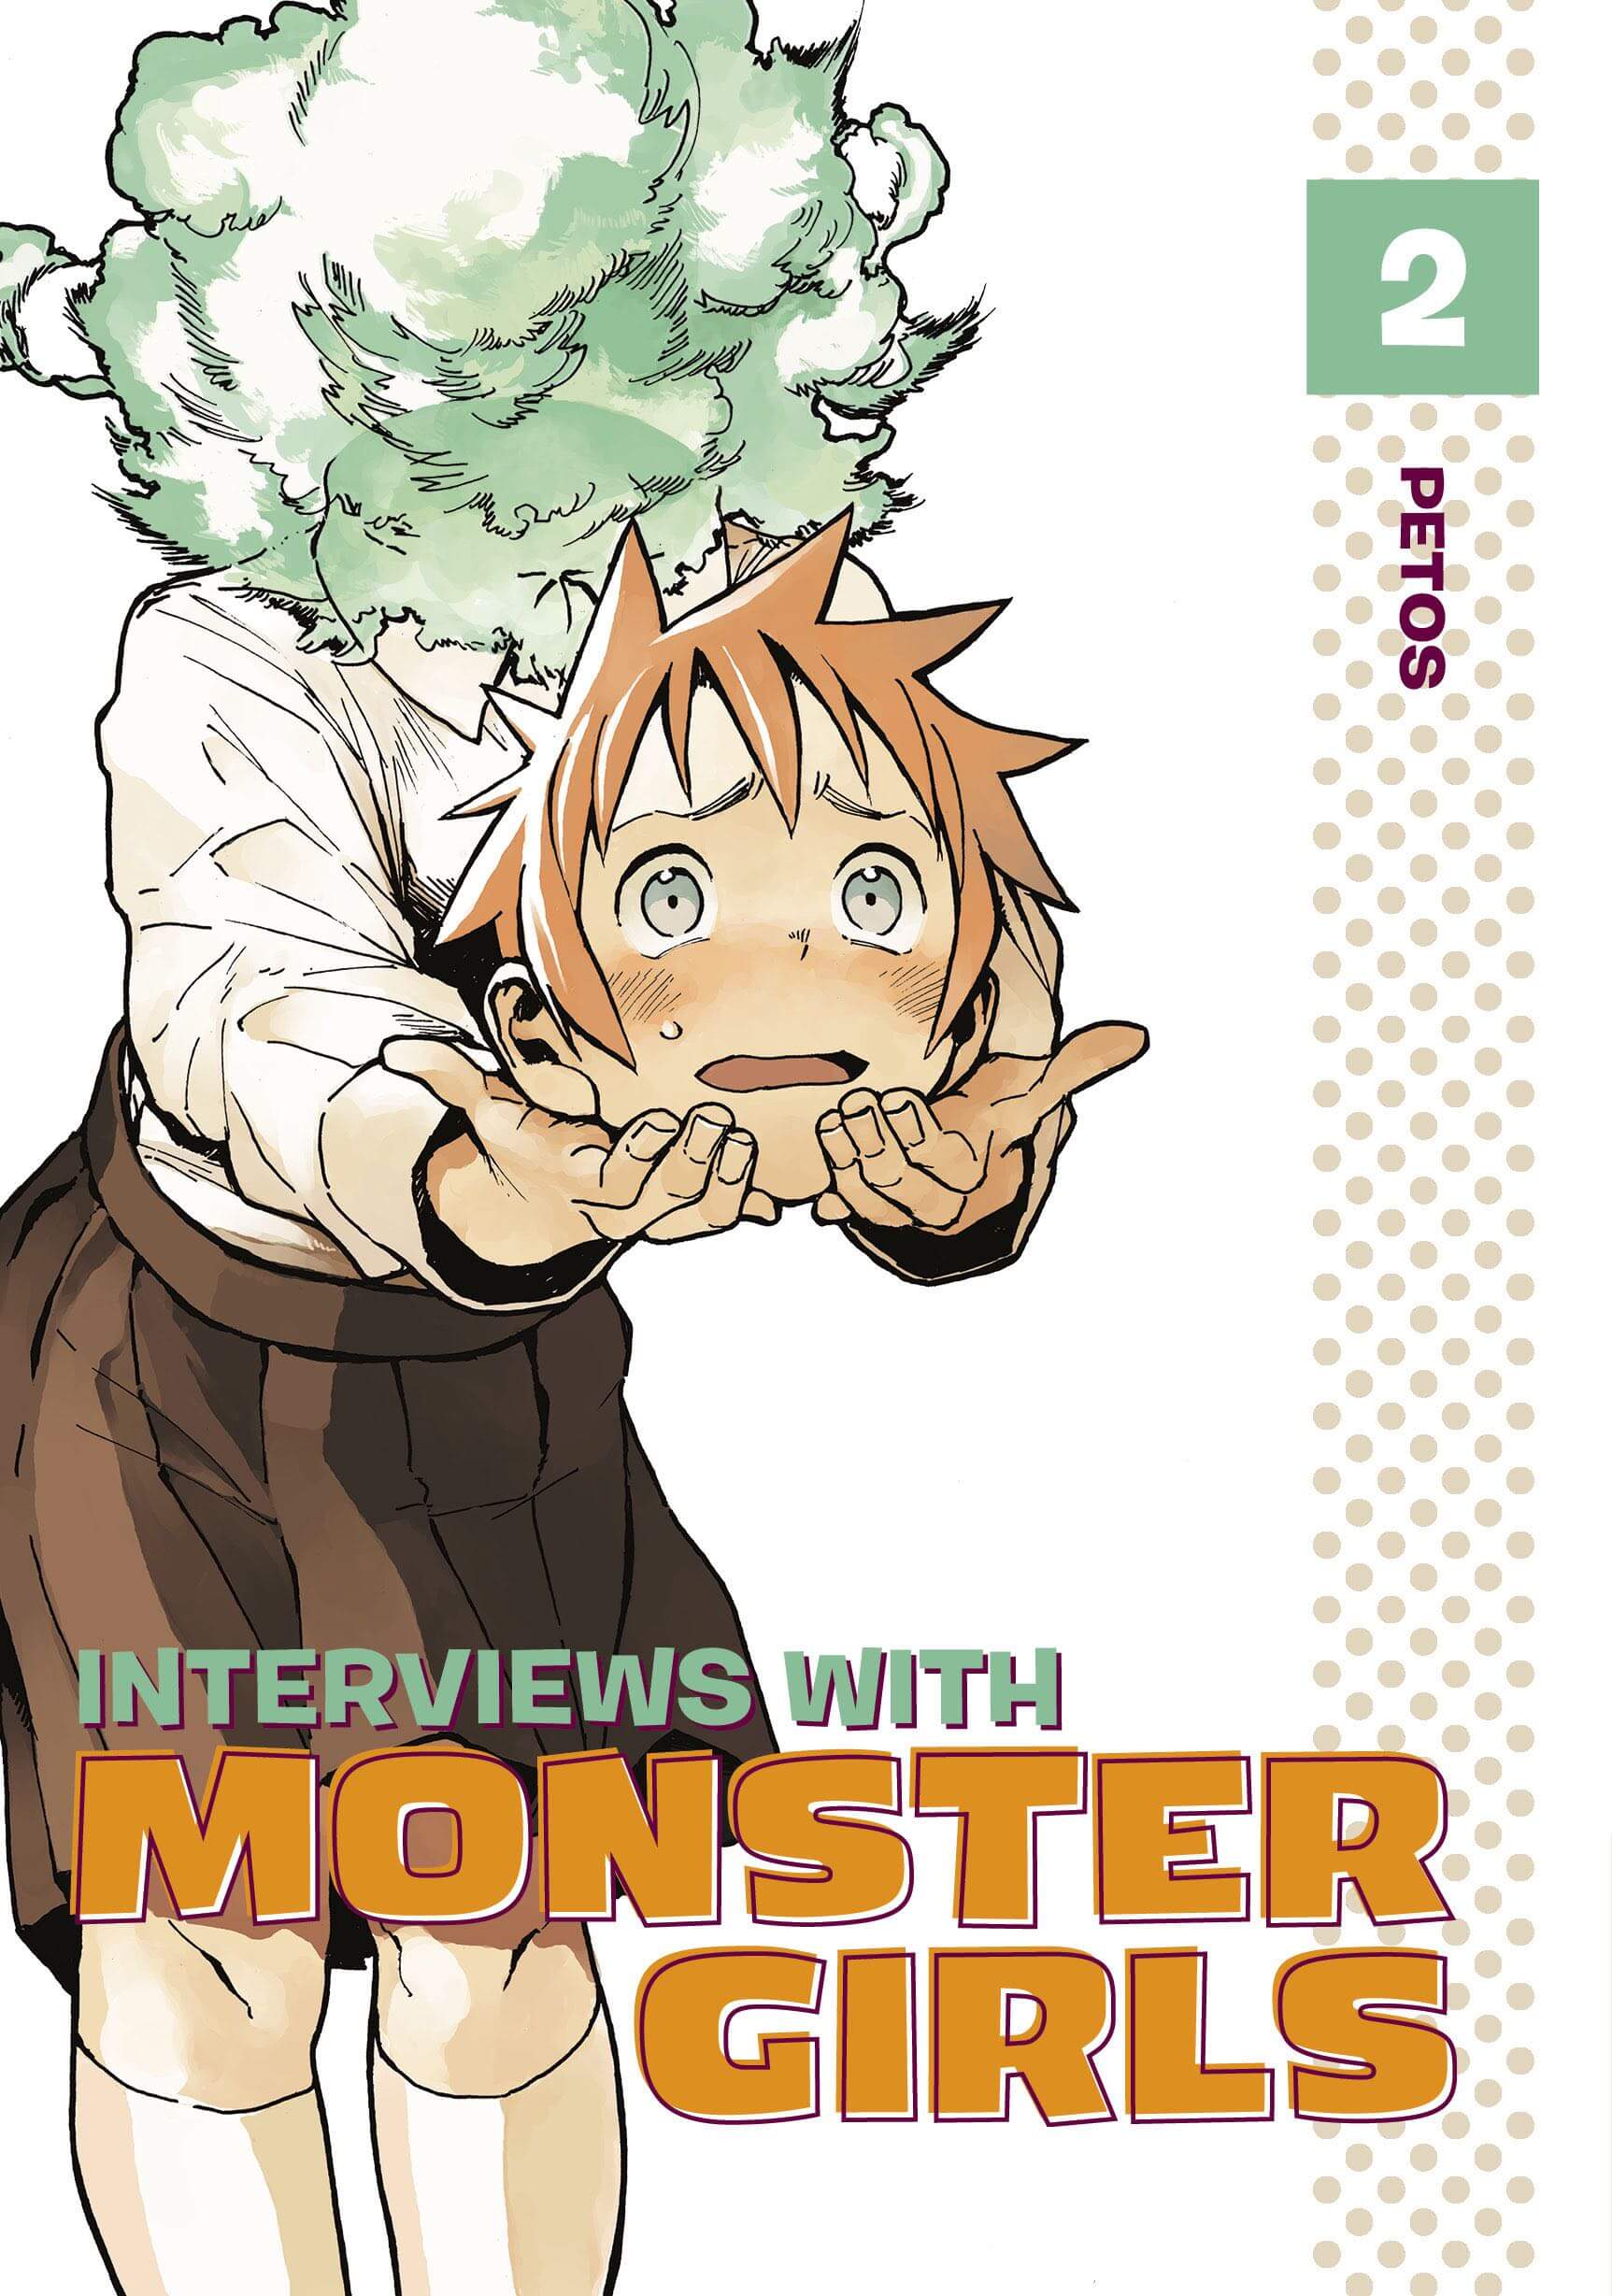 Interviews With Monster Girls #2